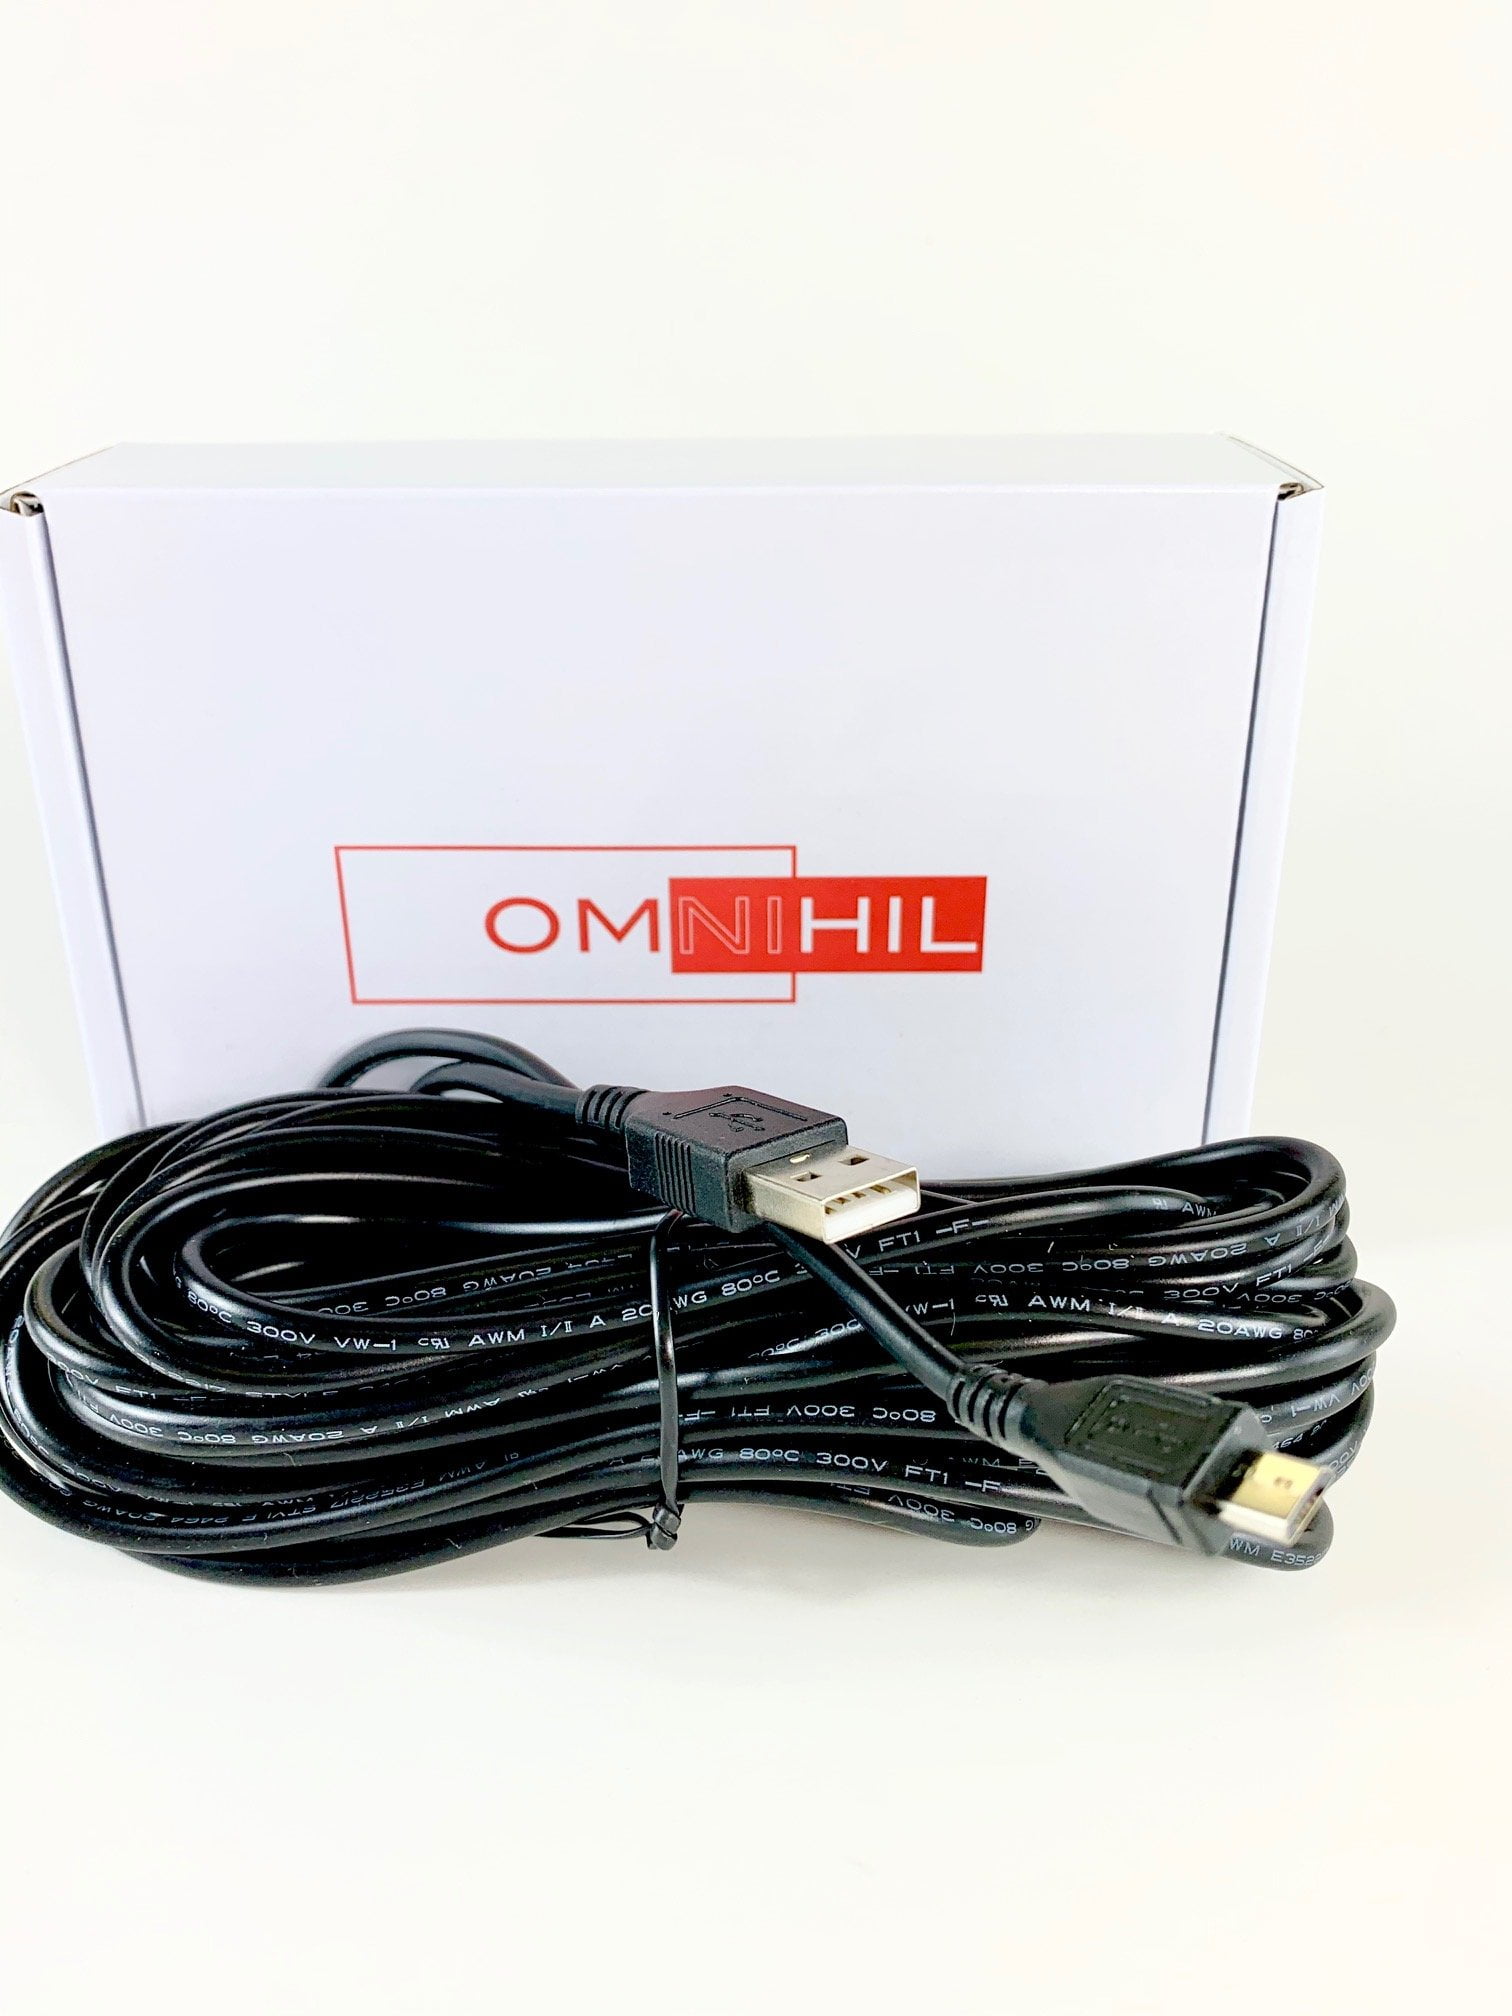 OMNIHIL 15 Feet Long High Speed USB 2.0 Cable Compatible with Nikon LS-40 Negative Slide Film Scanner 